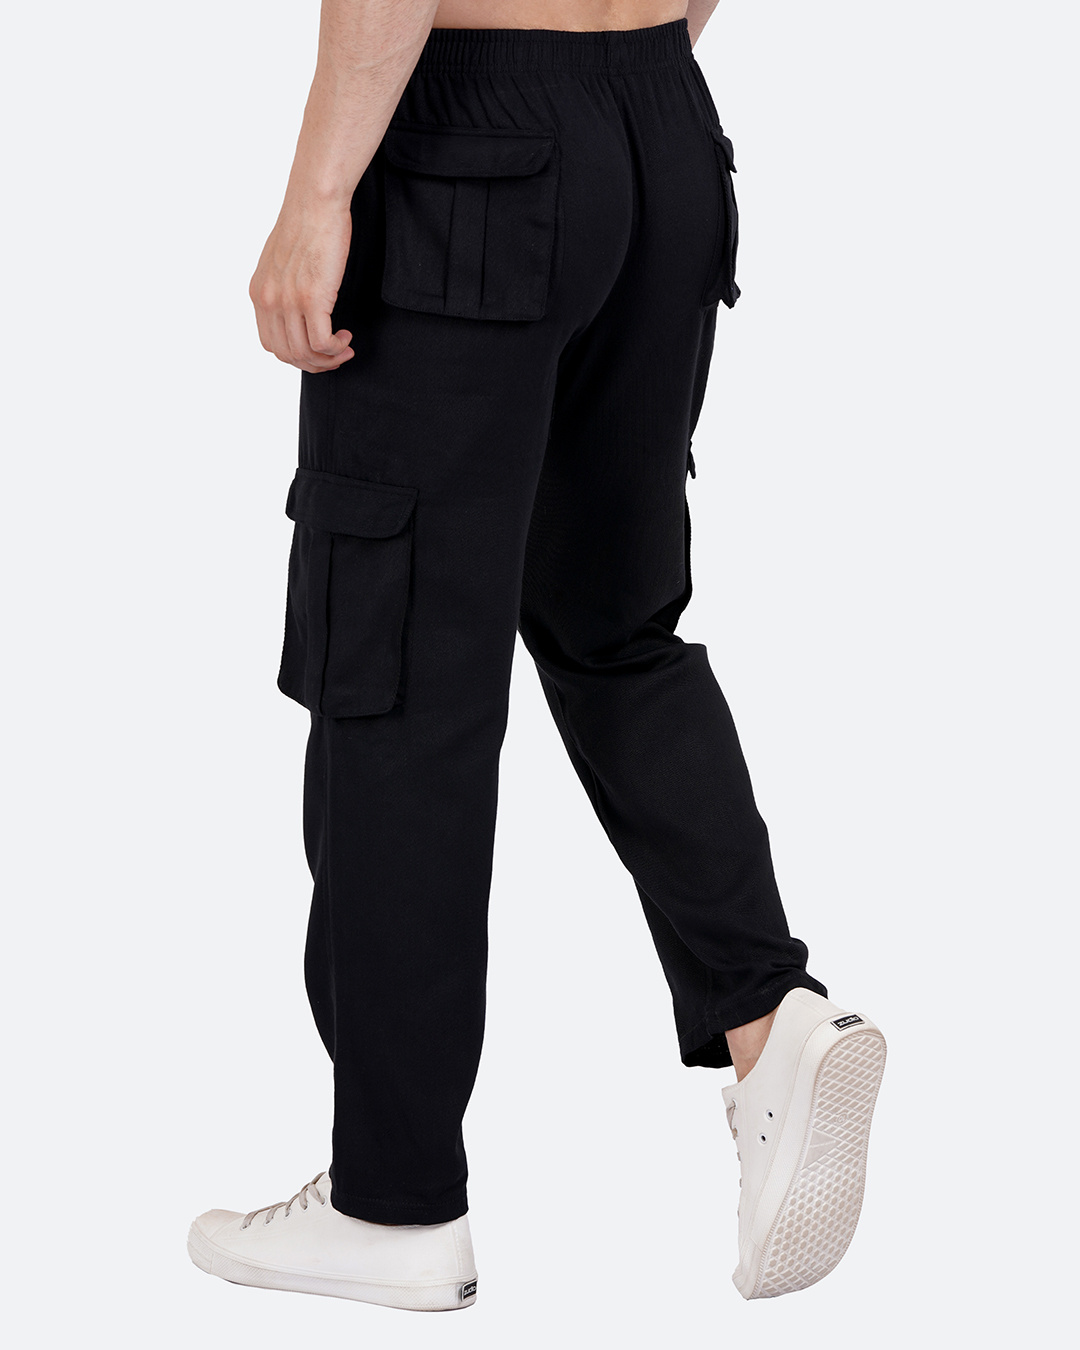 Loose Fit Jeans | Cargo Pants For Men at Best Price – Peplos Jeans